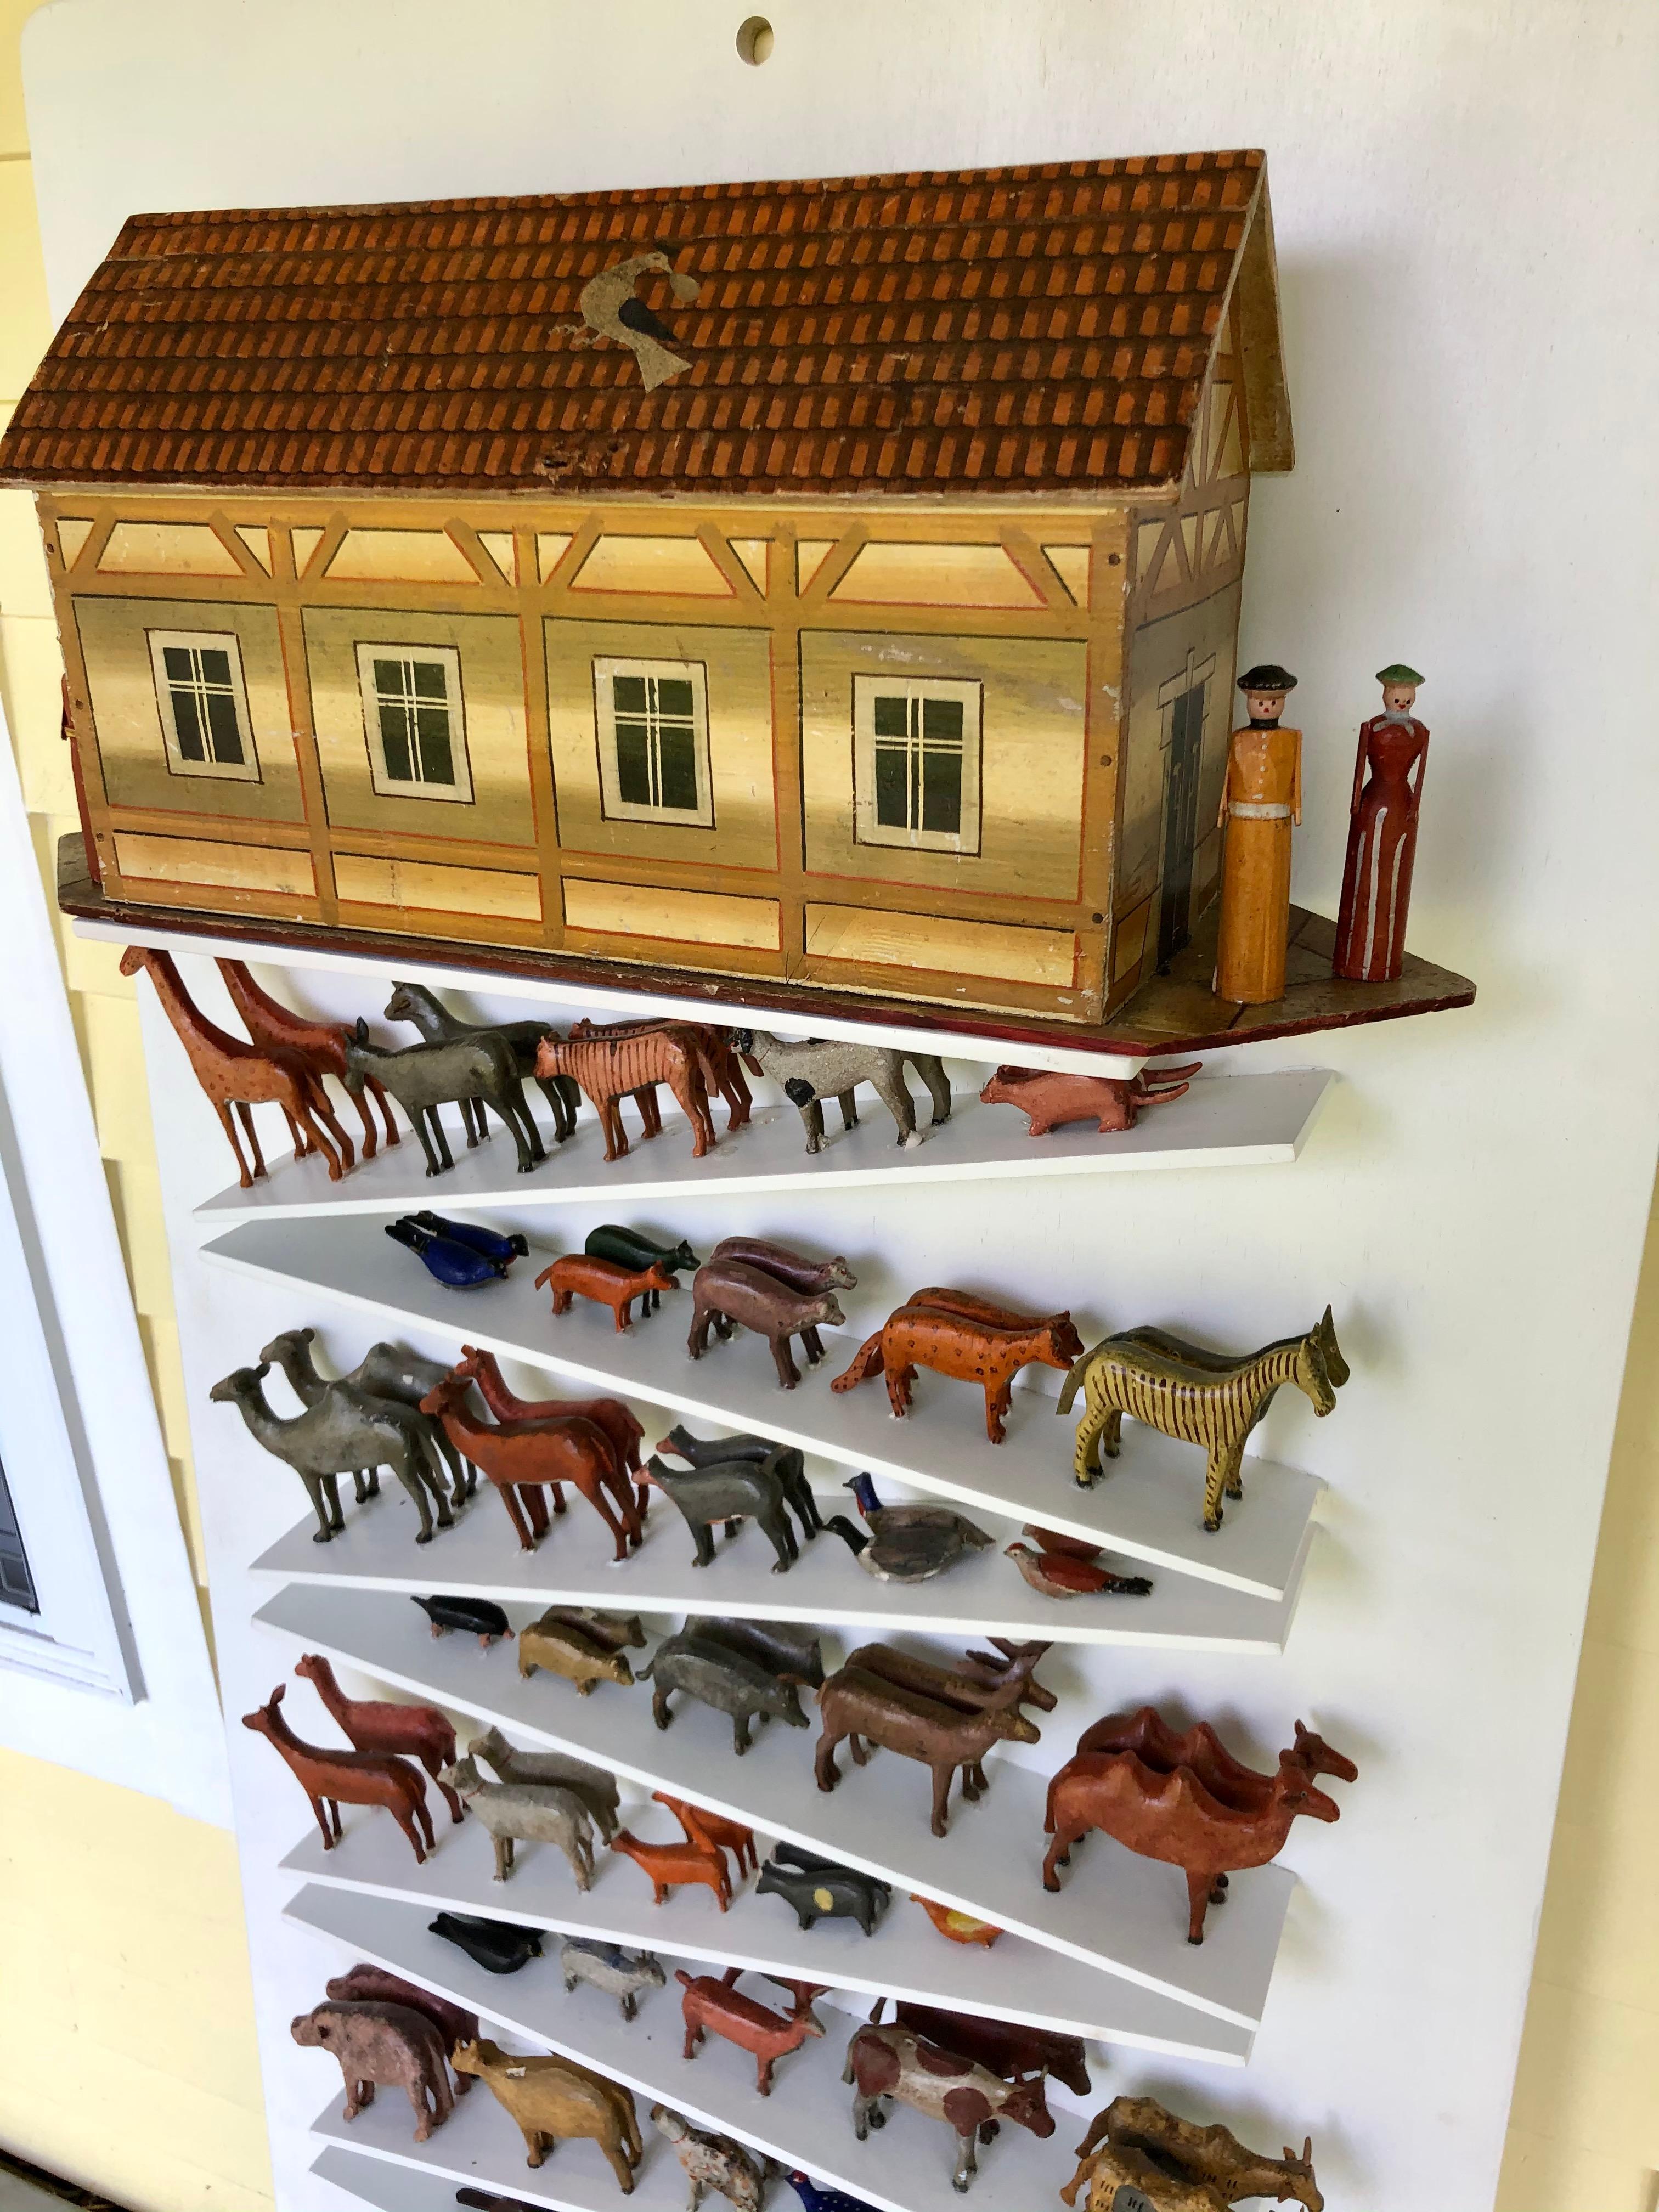 These ark collections were a very popular toy in the 19th century from Erzgebirge in Germany. This particular set is quite substantial with over 120 carved and painted figures and it presented on a custom wall mount display. Sets of this size and